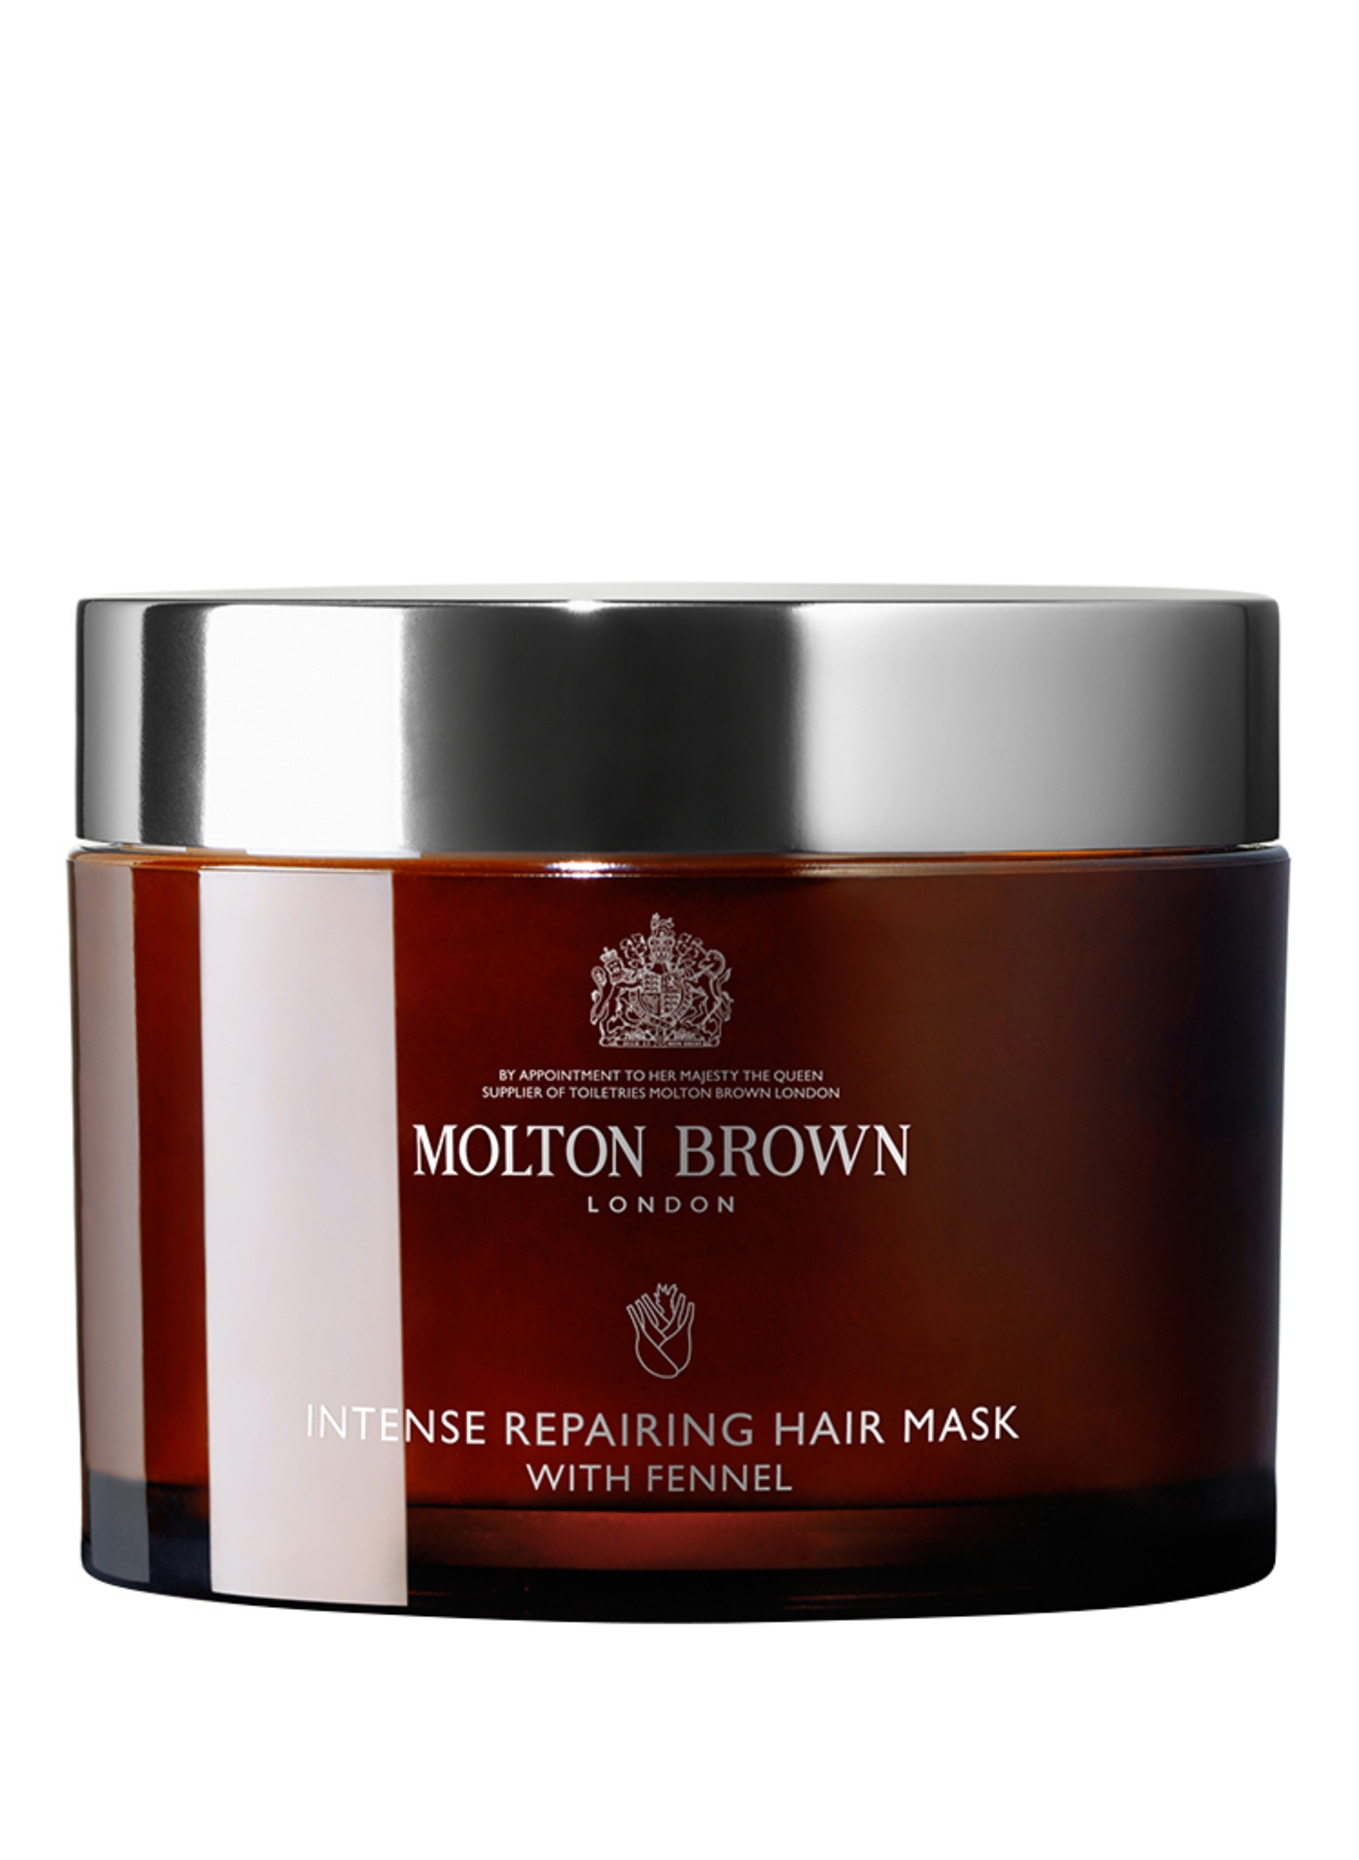 MOLTON BROWN INTENSE REPAIRING HAIR MASK WITH FENNEL (Obrázek 1)